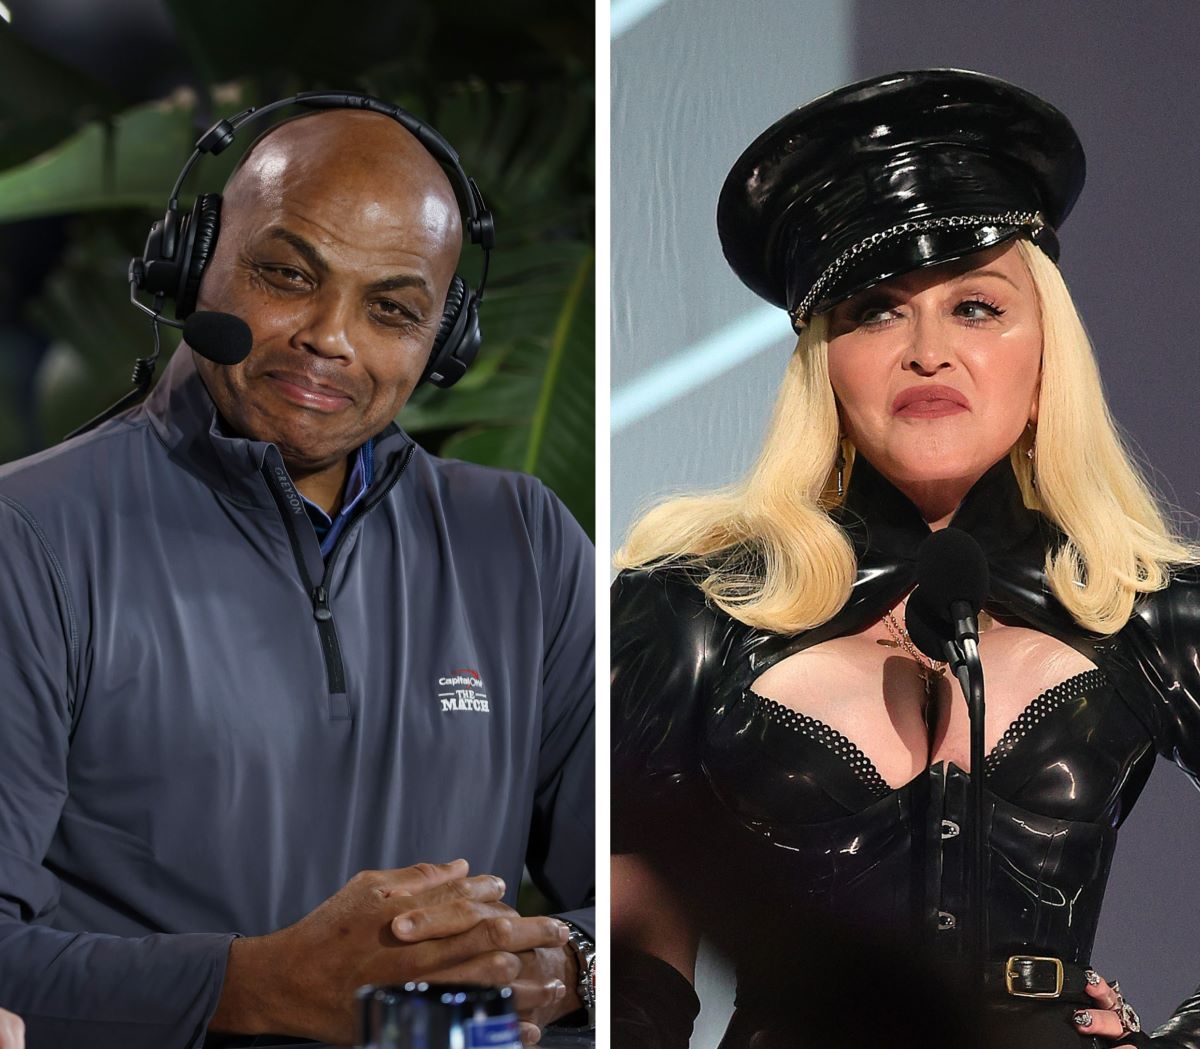 (L) Charles Barkley smiles during The Match IX in Florida, (R) Madonna speaks onstage at the MTV Movie Awards